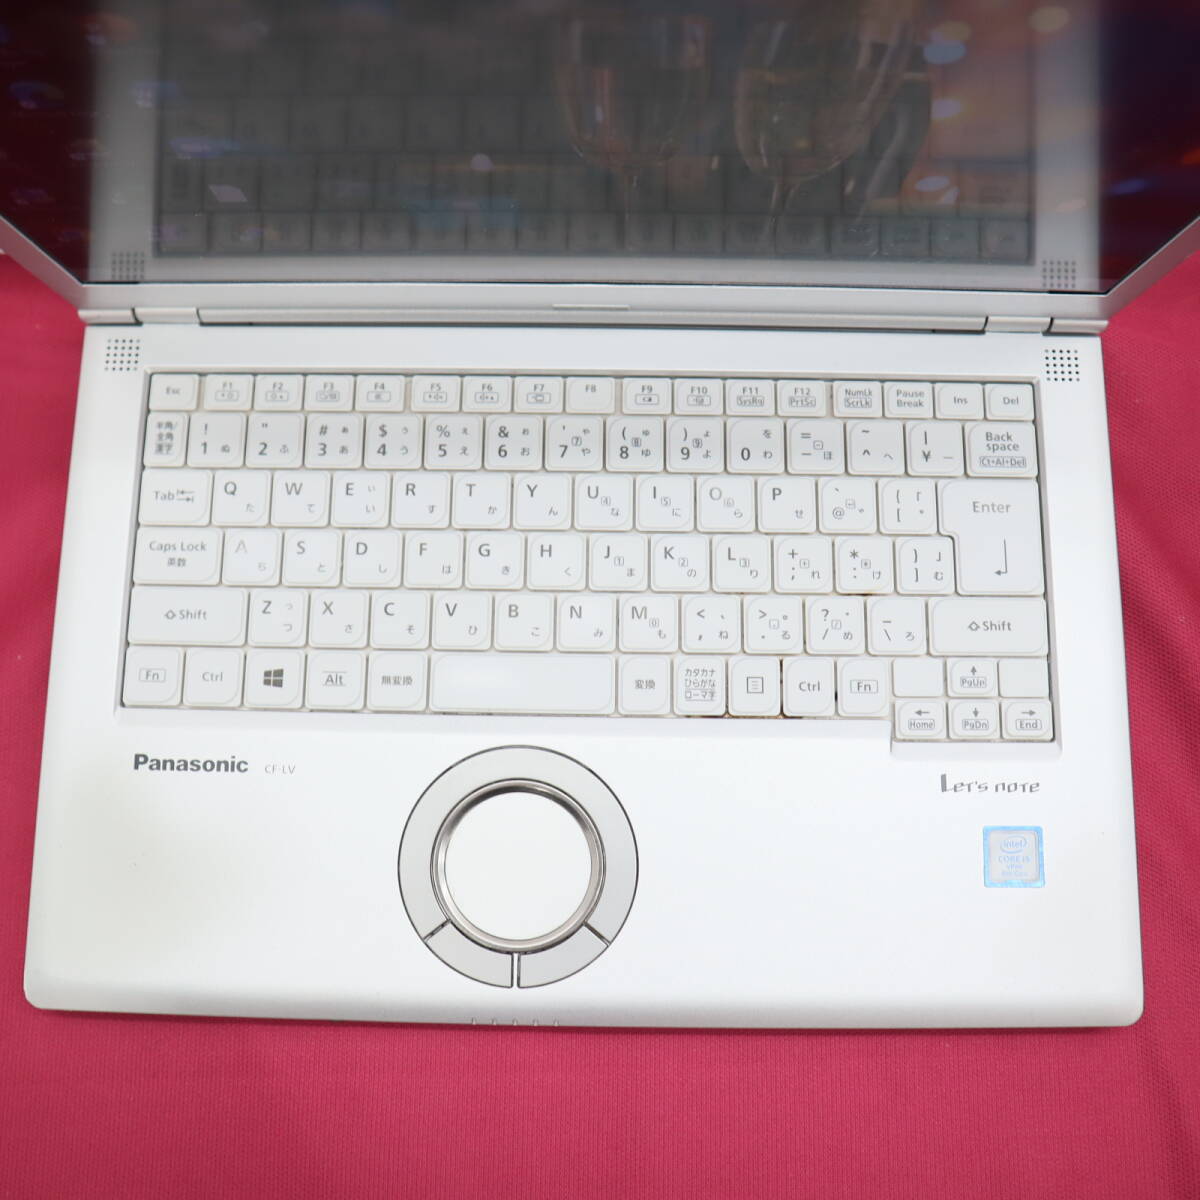 * used PC height performance 8 generation 4 core i5!SSD256GB memory 8GB*CF-LV8 Core i5-8365U Web camera Win11 MS Office2019 Home&Business*P71482